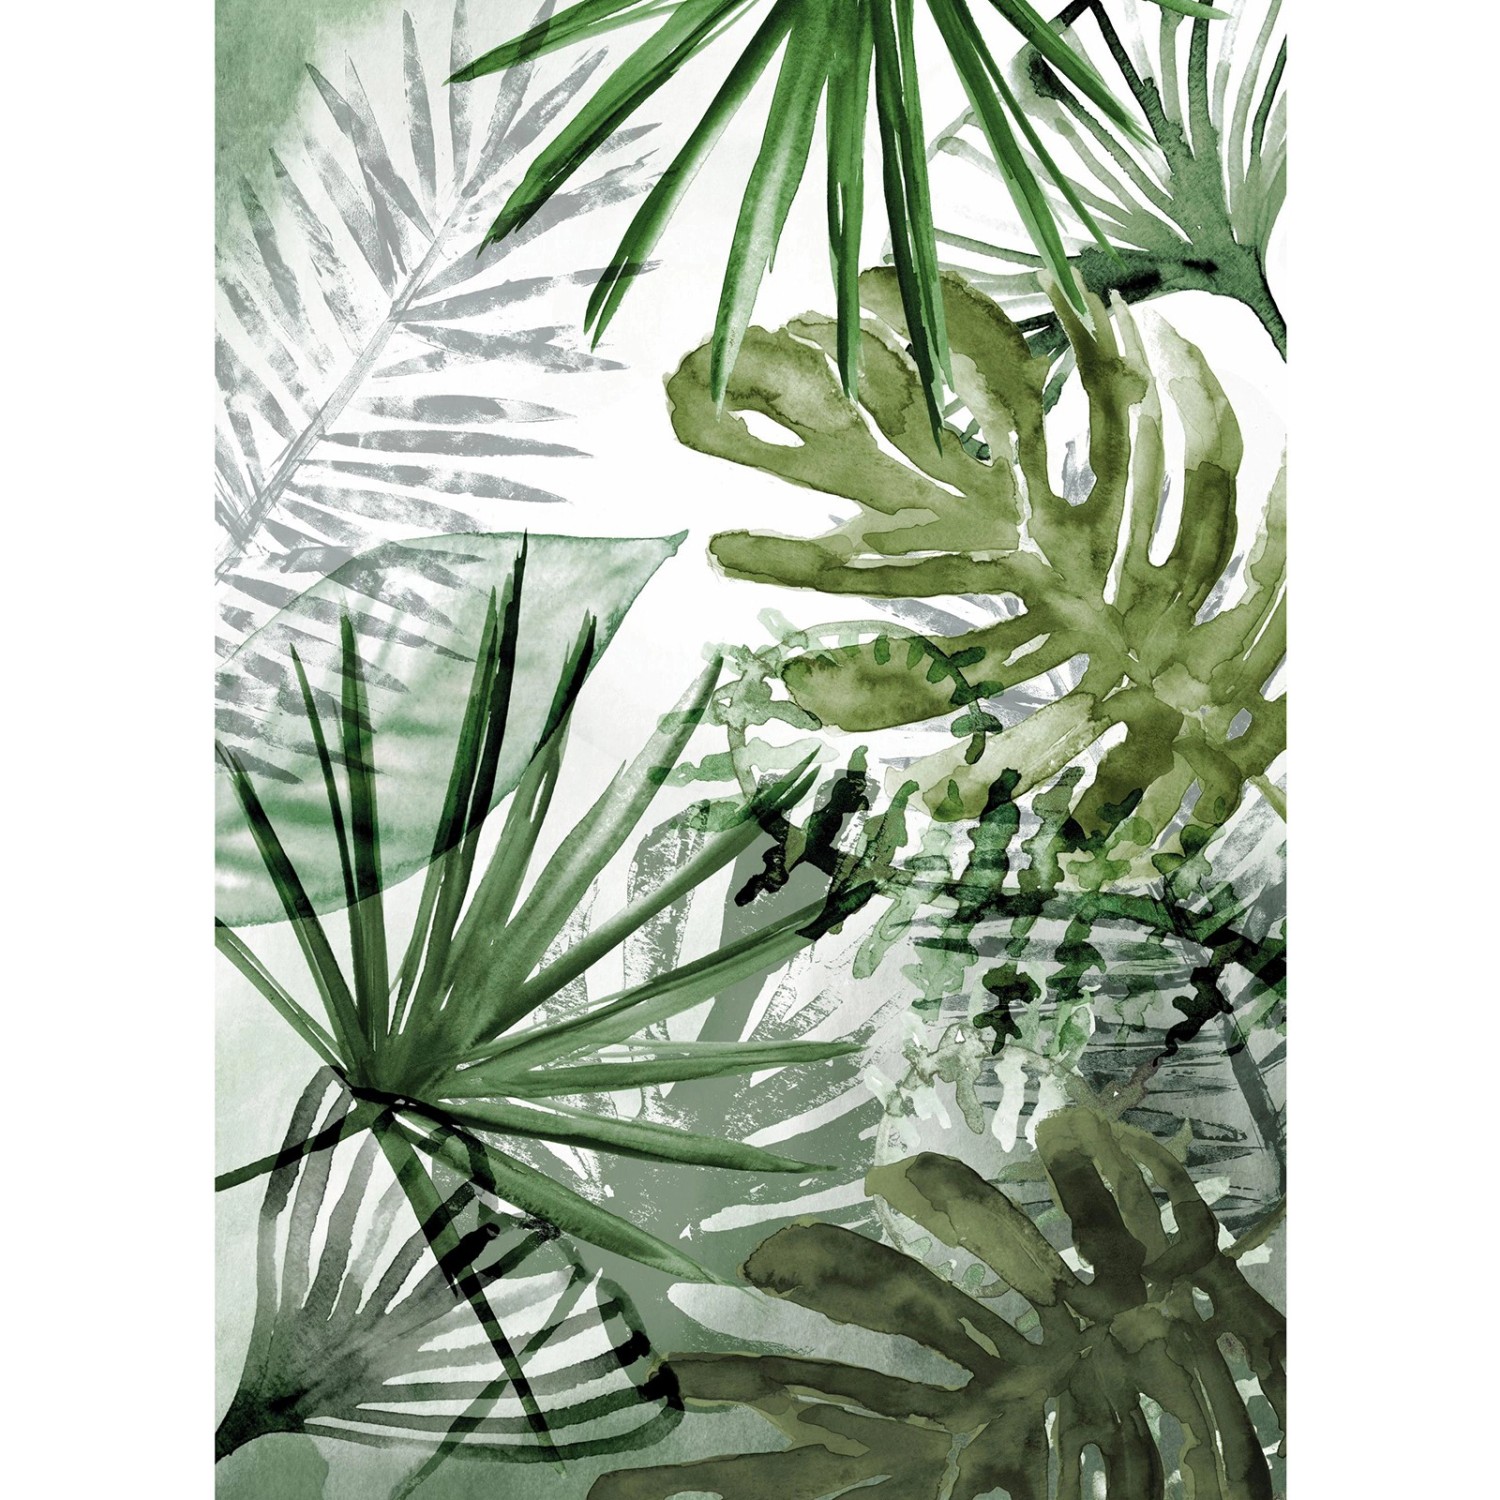 Art for the Home Fototapete Pure nature Monstera 280 x 200 cm von Art for the Home